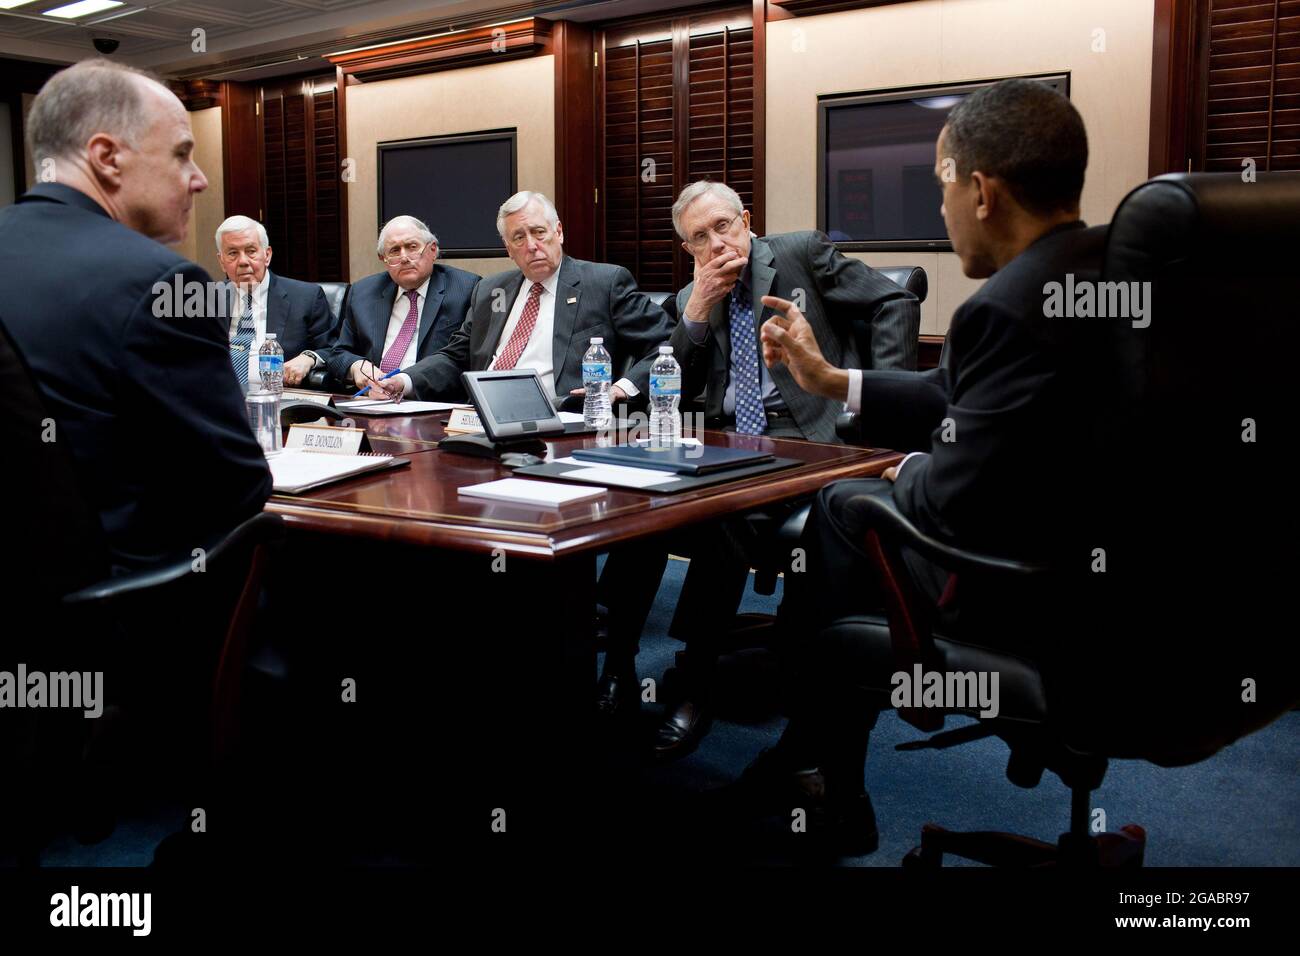 United States President Barack Obama meets with a bipartisan group of Congressional leaders on Libya in the Situation Room of the White House, March 18, 2011. Seated, from left, are: National Security Advisor Tom Donilon, U.S. Sen. Richard Lugar (Republican of Indiana), U.S. Senator Carl Levin (Democrat of Michigan),  U.S. Representative Steny Hoyer (Democrat of Maryland), and U.S. Senate Majority Leader Harry Reid (Democrat of Nevada)..Mandatory Credit: Pete Souza - White House via CNP/Sipa USA Stock Photo